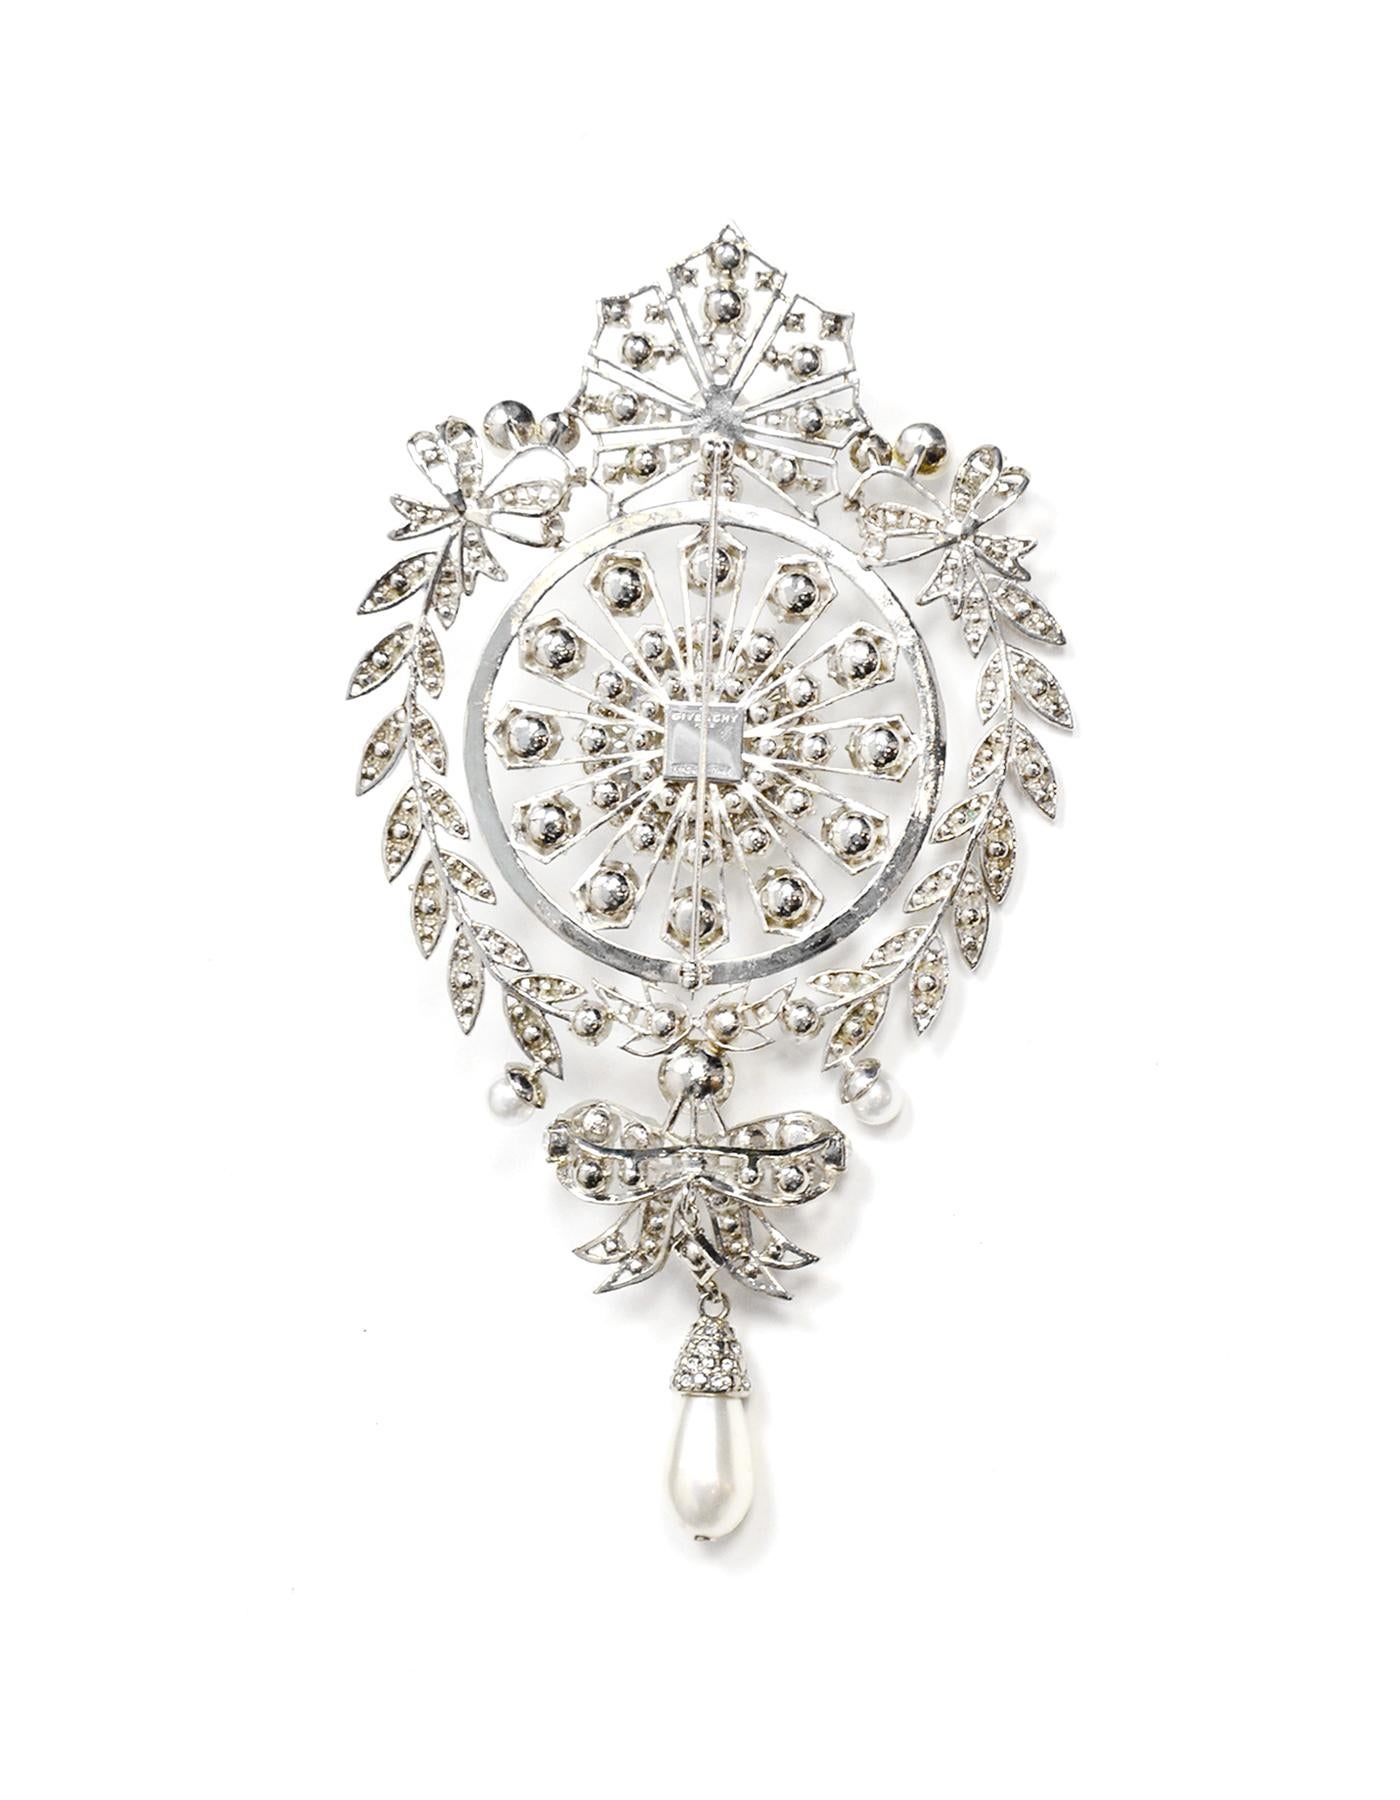 Givenchy Crystal & Faux Pearl XL Brooch
Made In: Italy
Year of Production: 2018-2019
Color: Silvertone, ivory
Materials: Swarovski crystals, faux pearls, metal
Hallmarks: GIVENCHY MADE IN ITALY
Closure/Opening: Stick pin
Overall Condition: Excellent